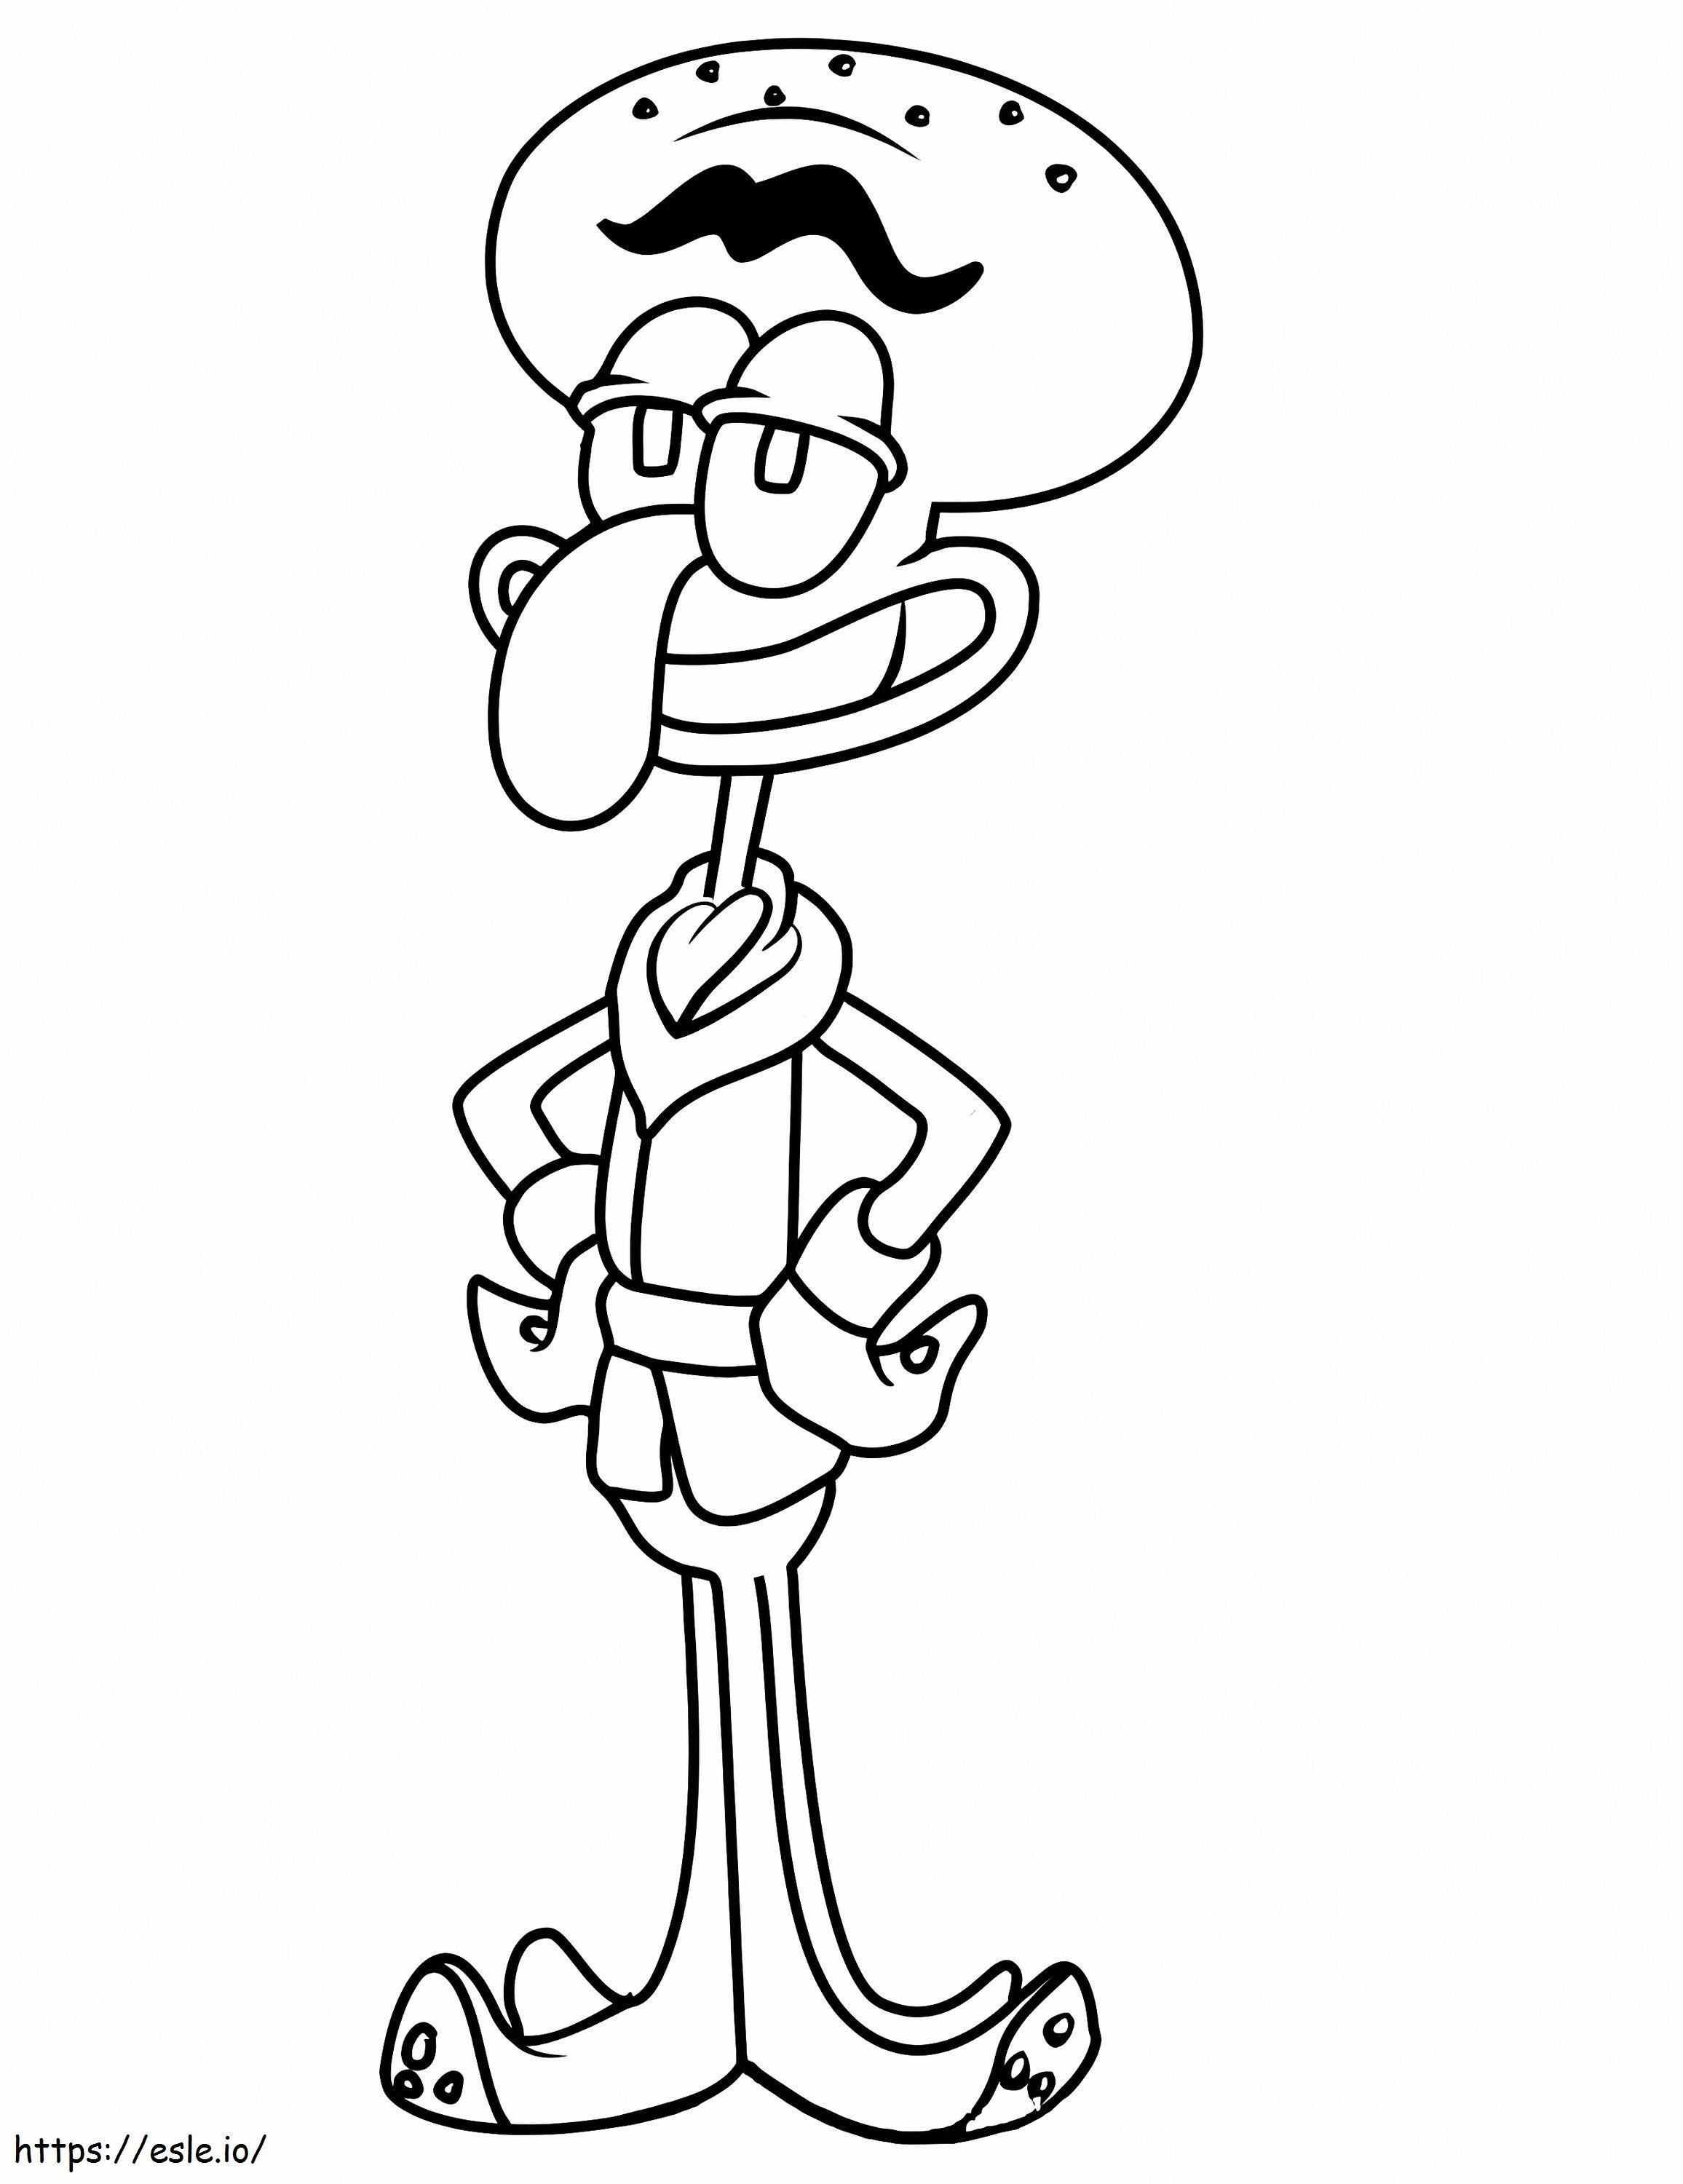 Squidward 1 coloring page